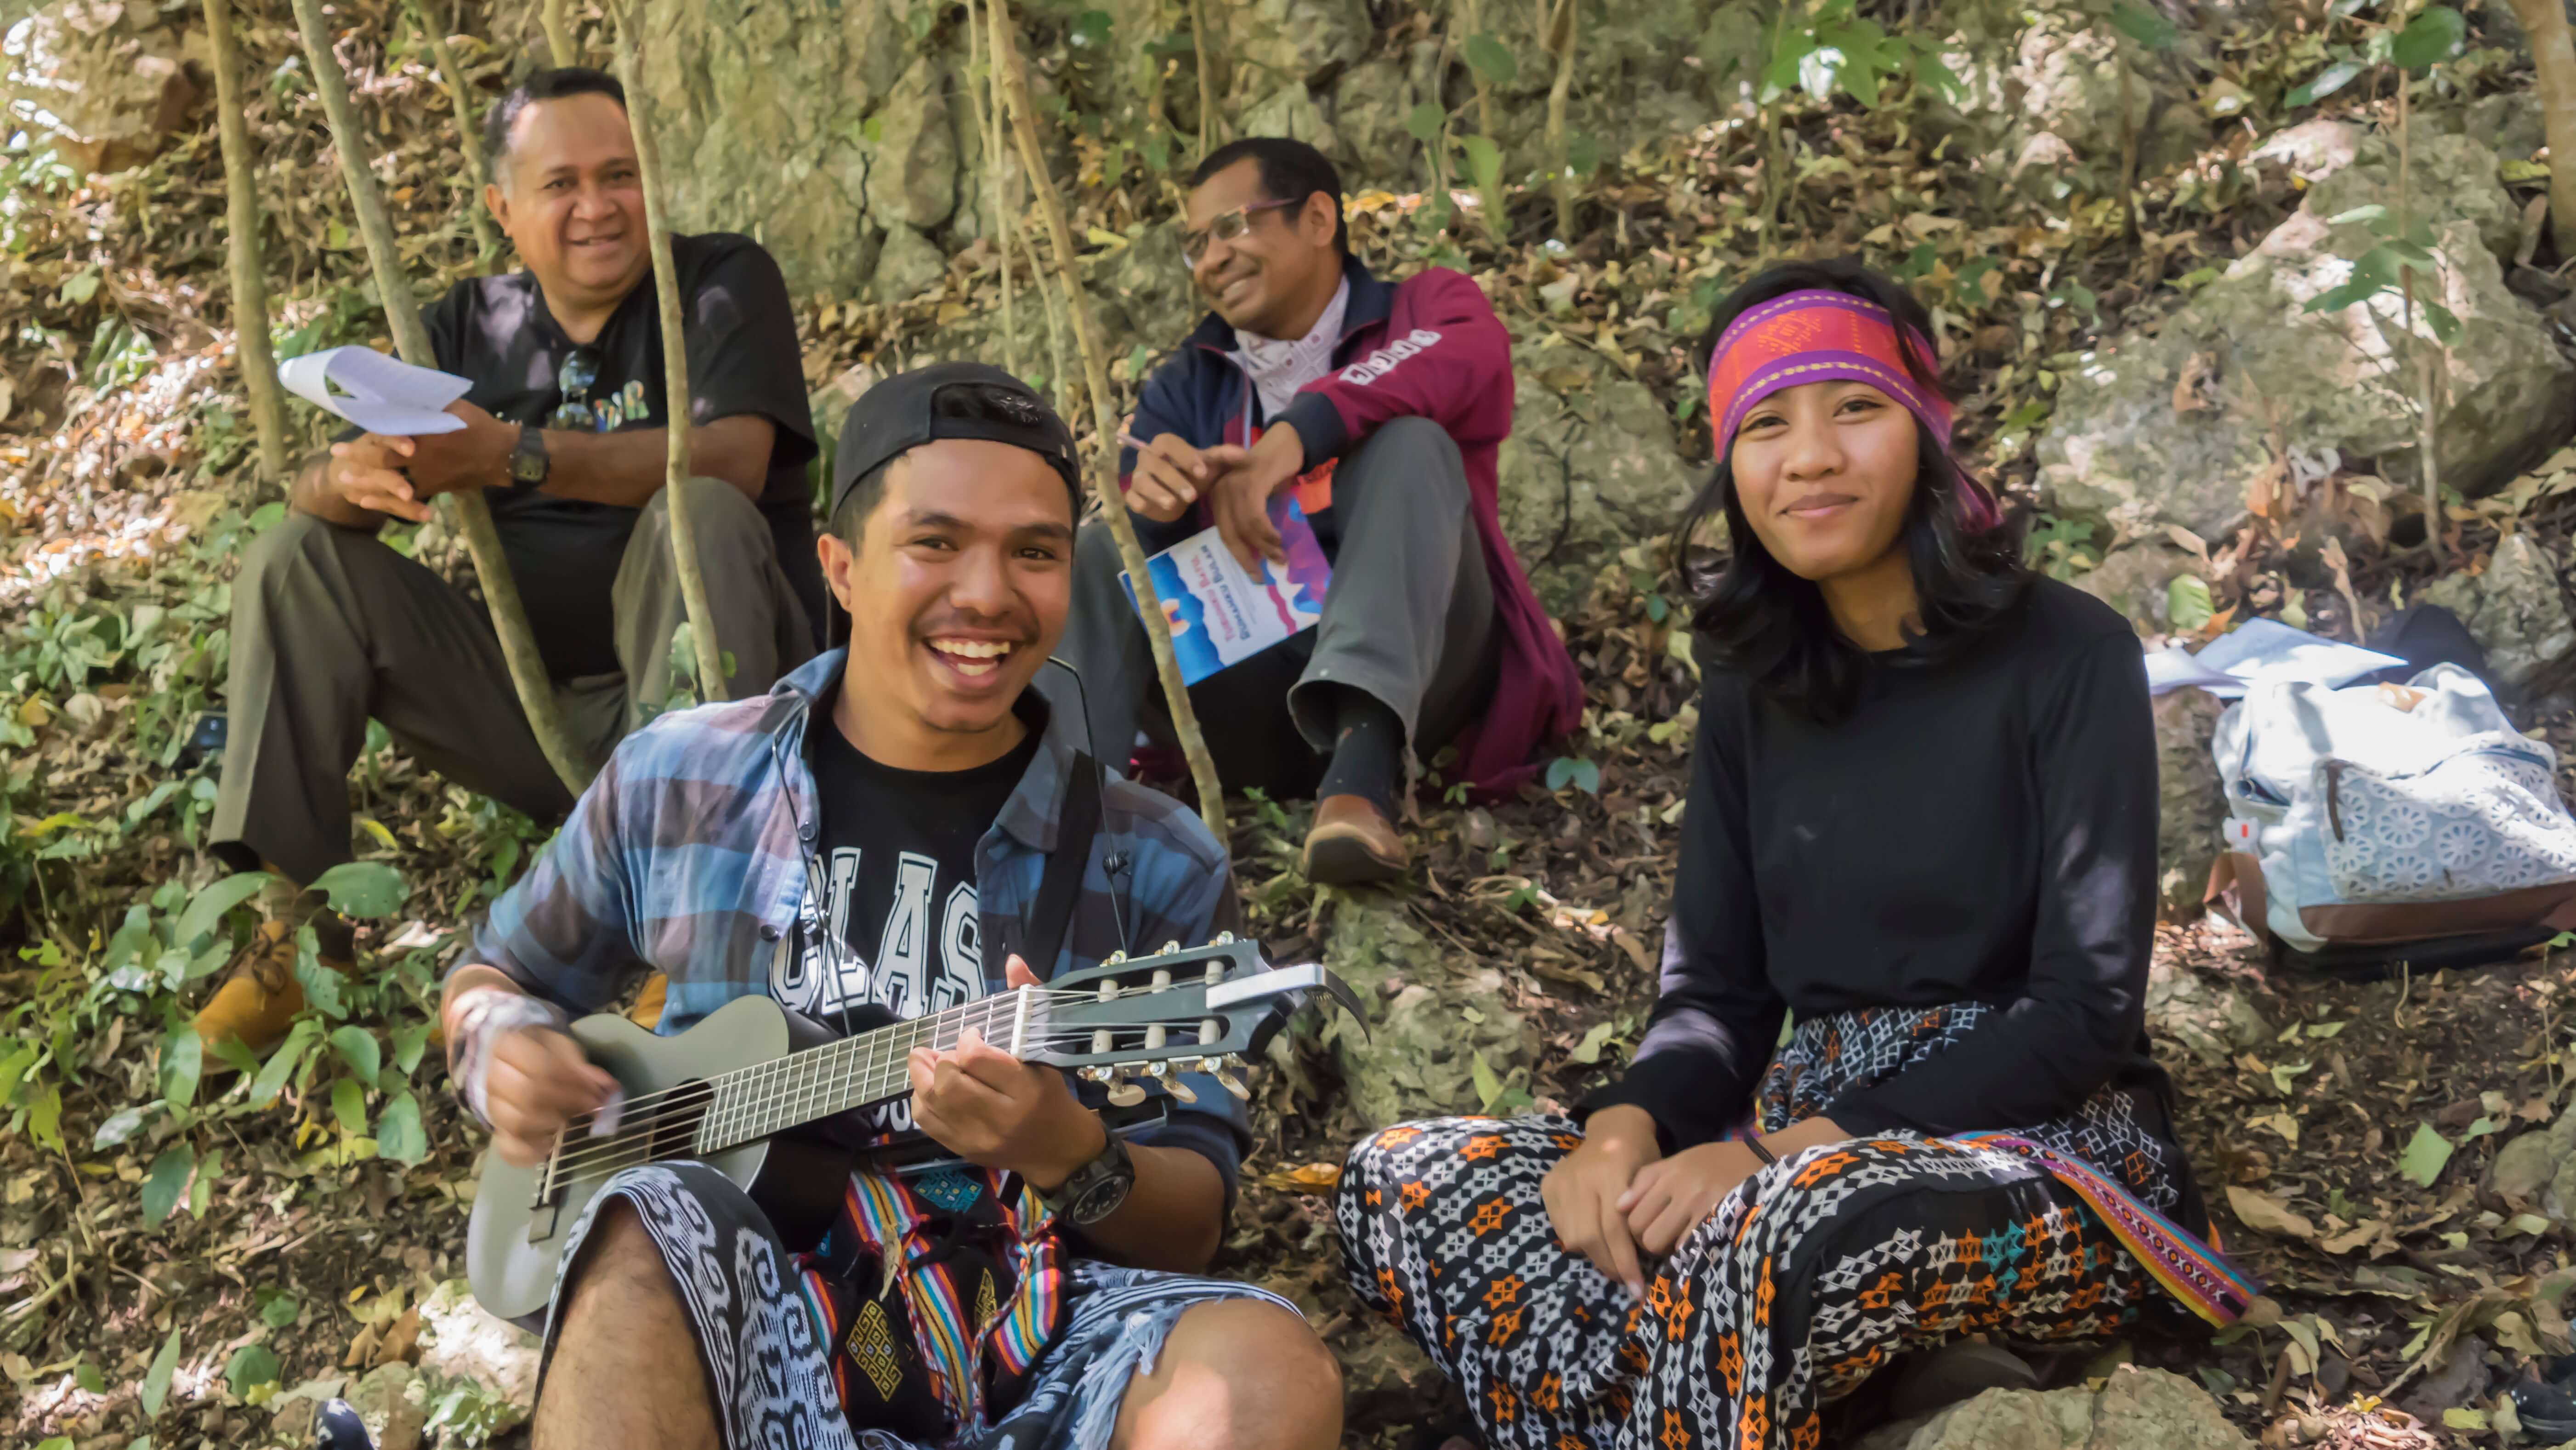  Reinhard Nuhalawang (with guitalele) and Dewi Marlysawati of Forum Soe Peduli kicked off lunch with a Dawan language singalong for those on the Heritage Trail. Photo by Andra Fembriarto